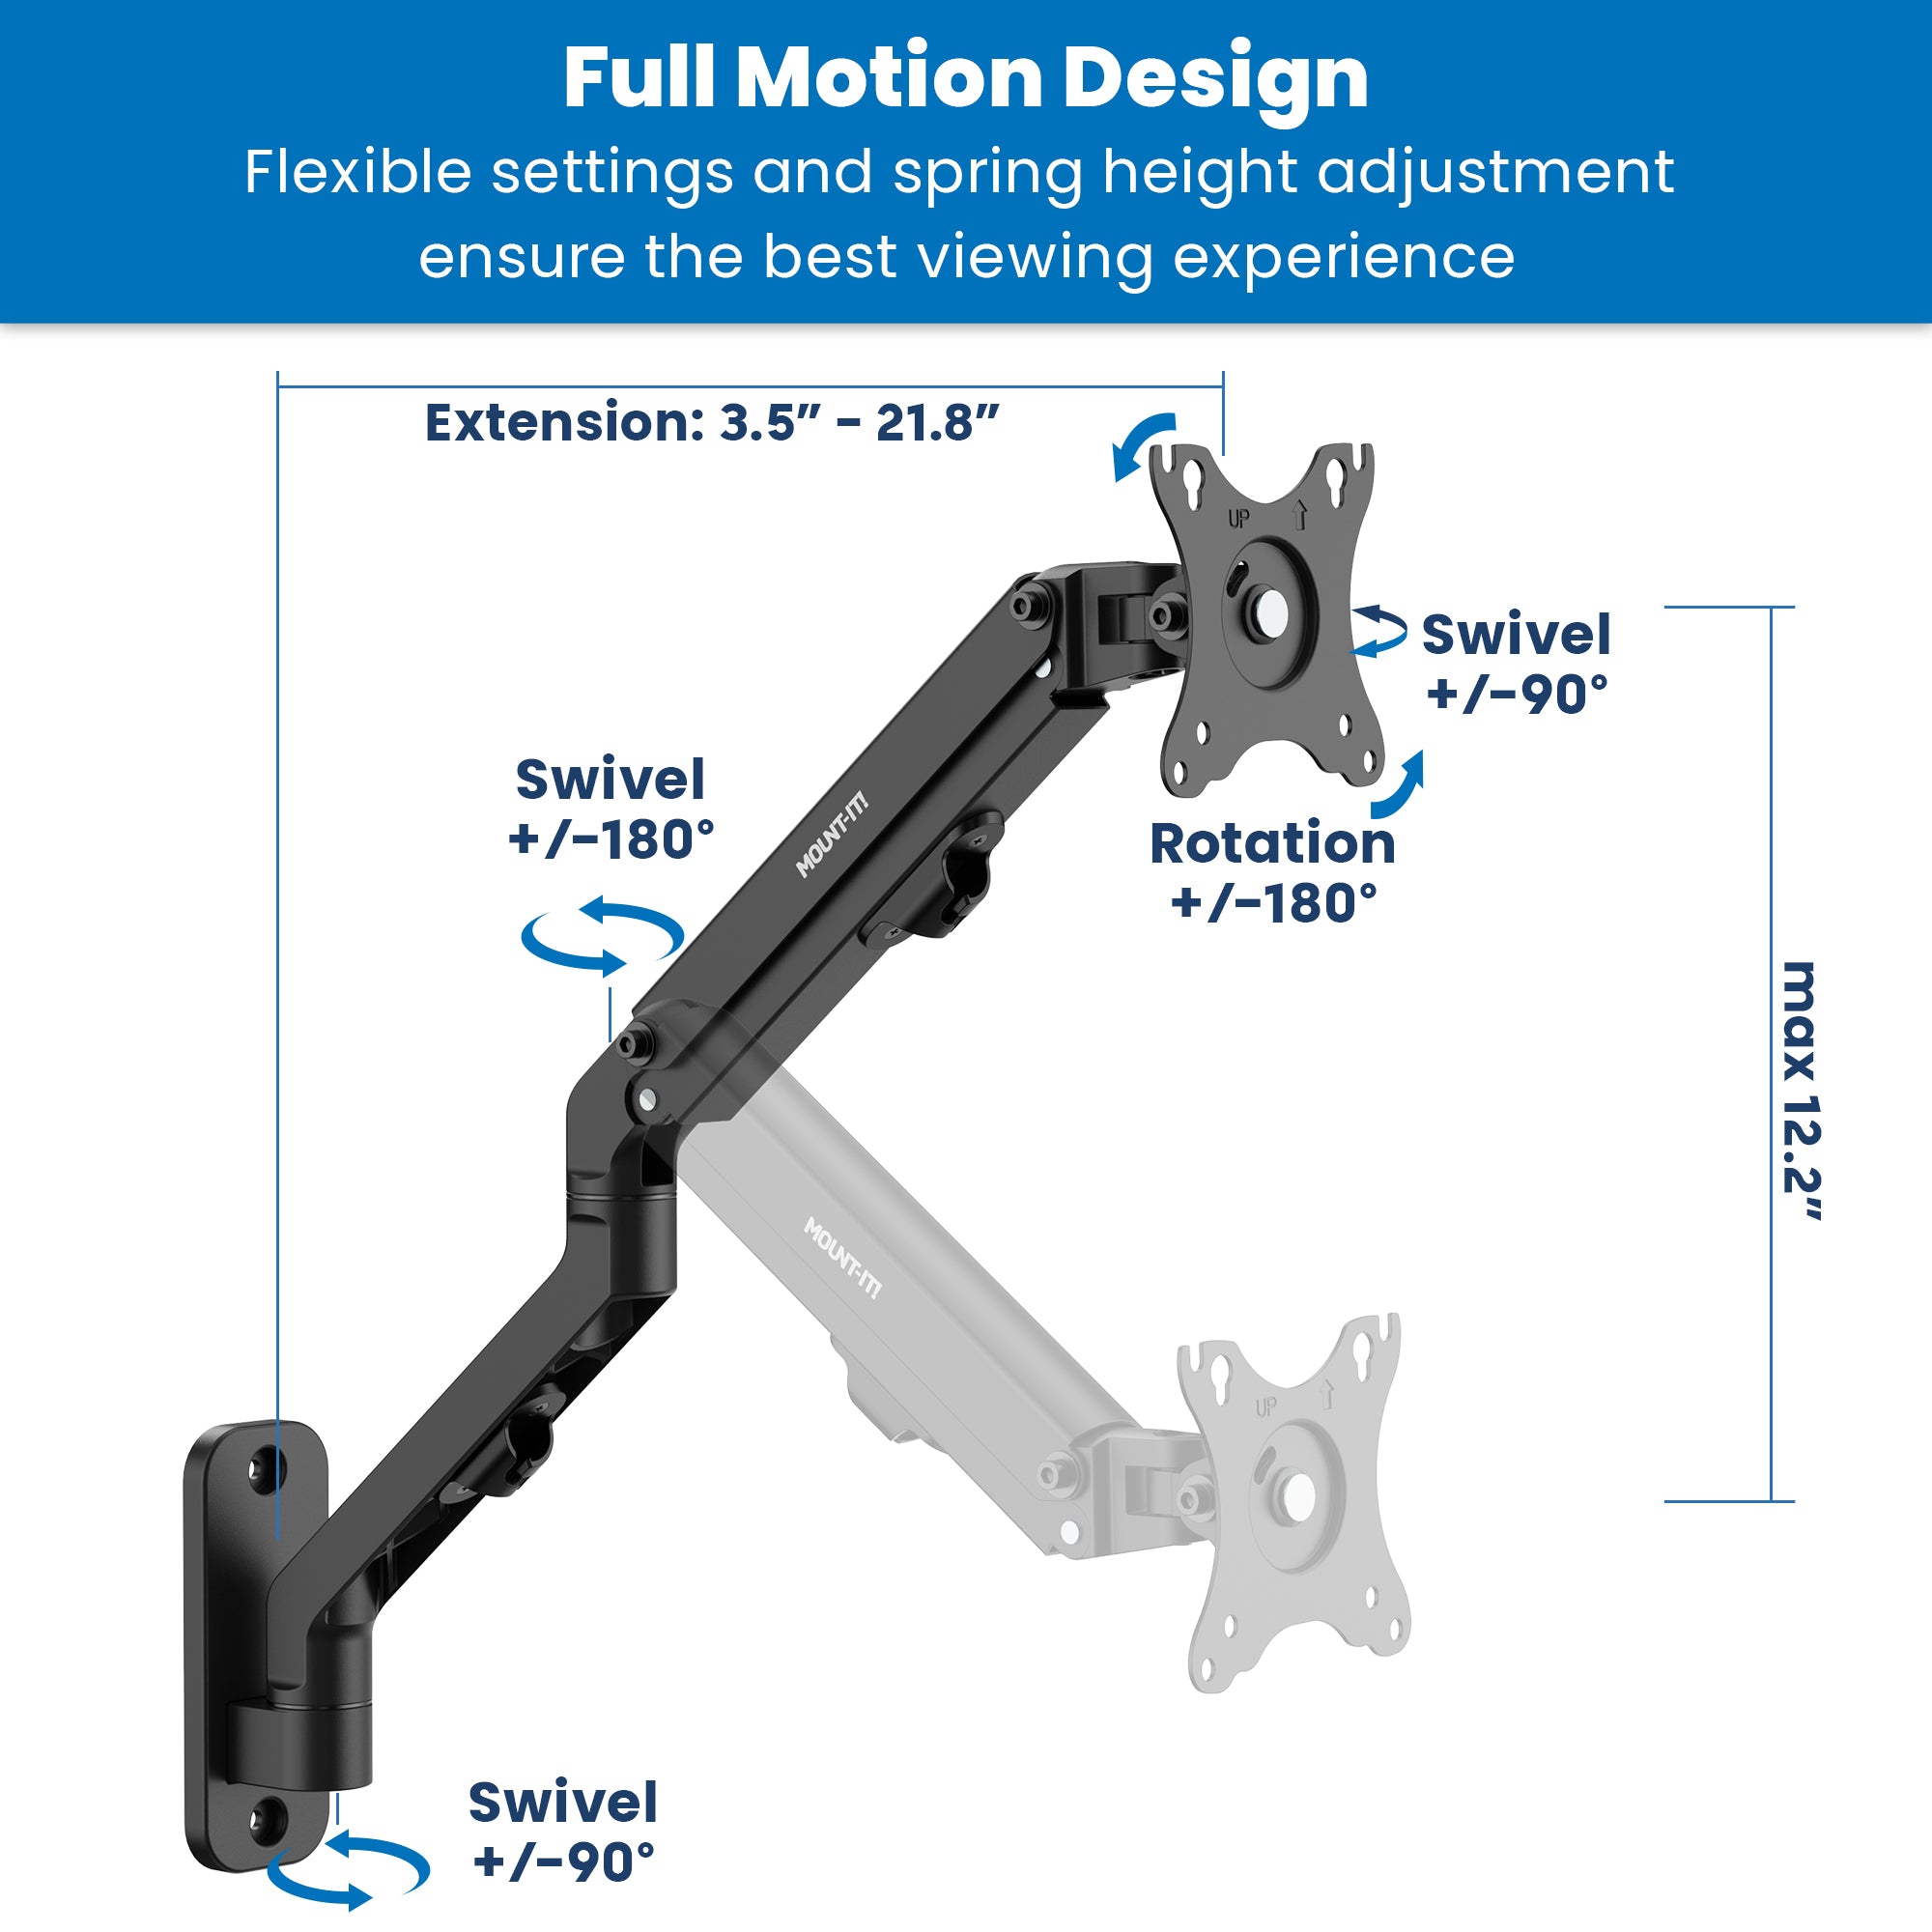 Counterbalance Monitor Arm for Wall and Pole Mounting